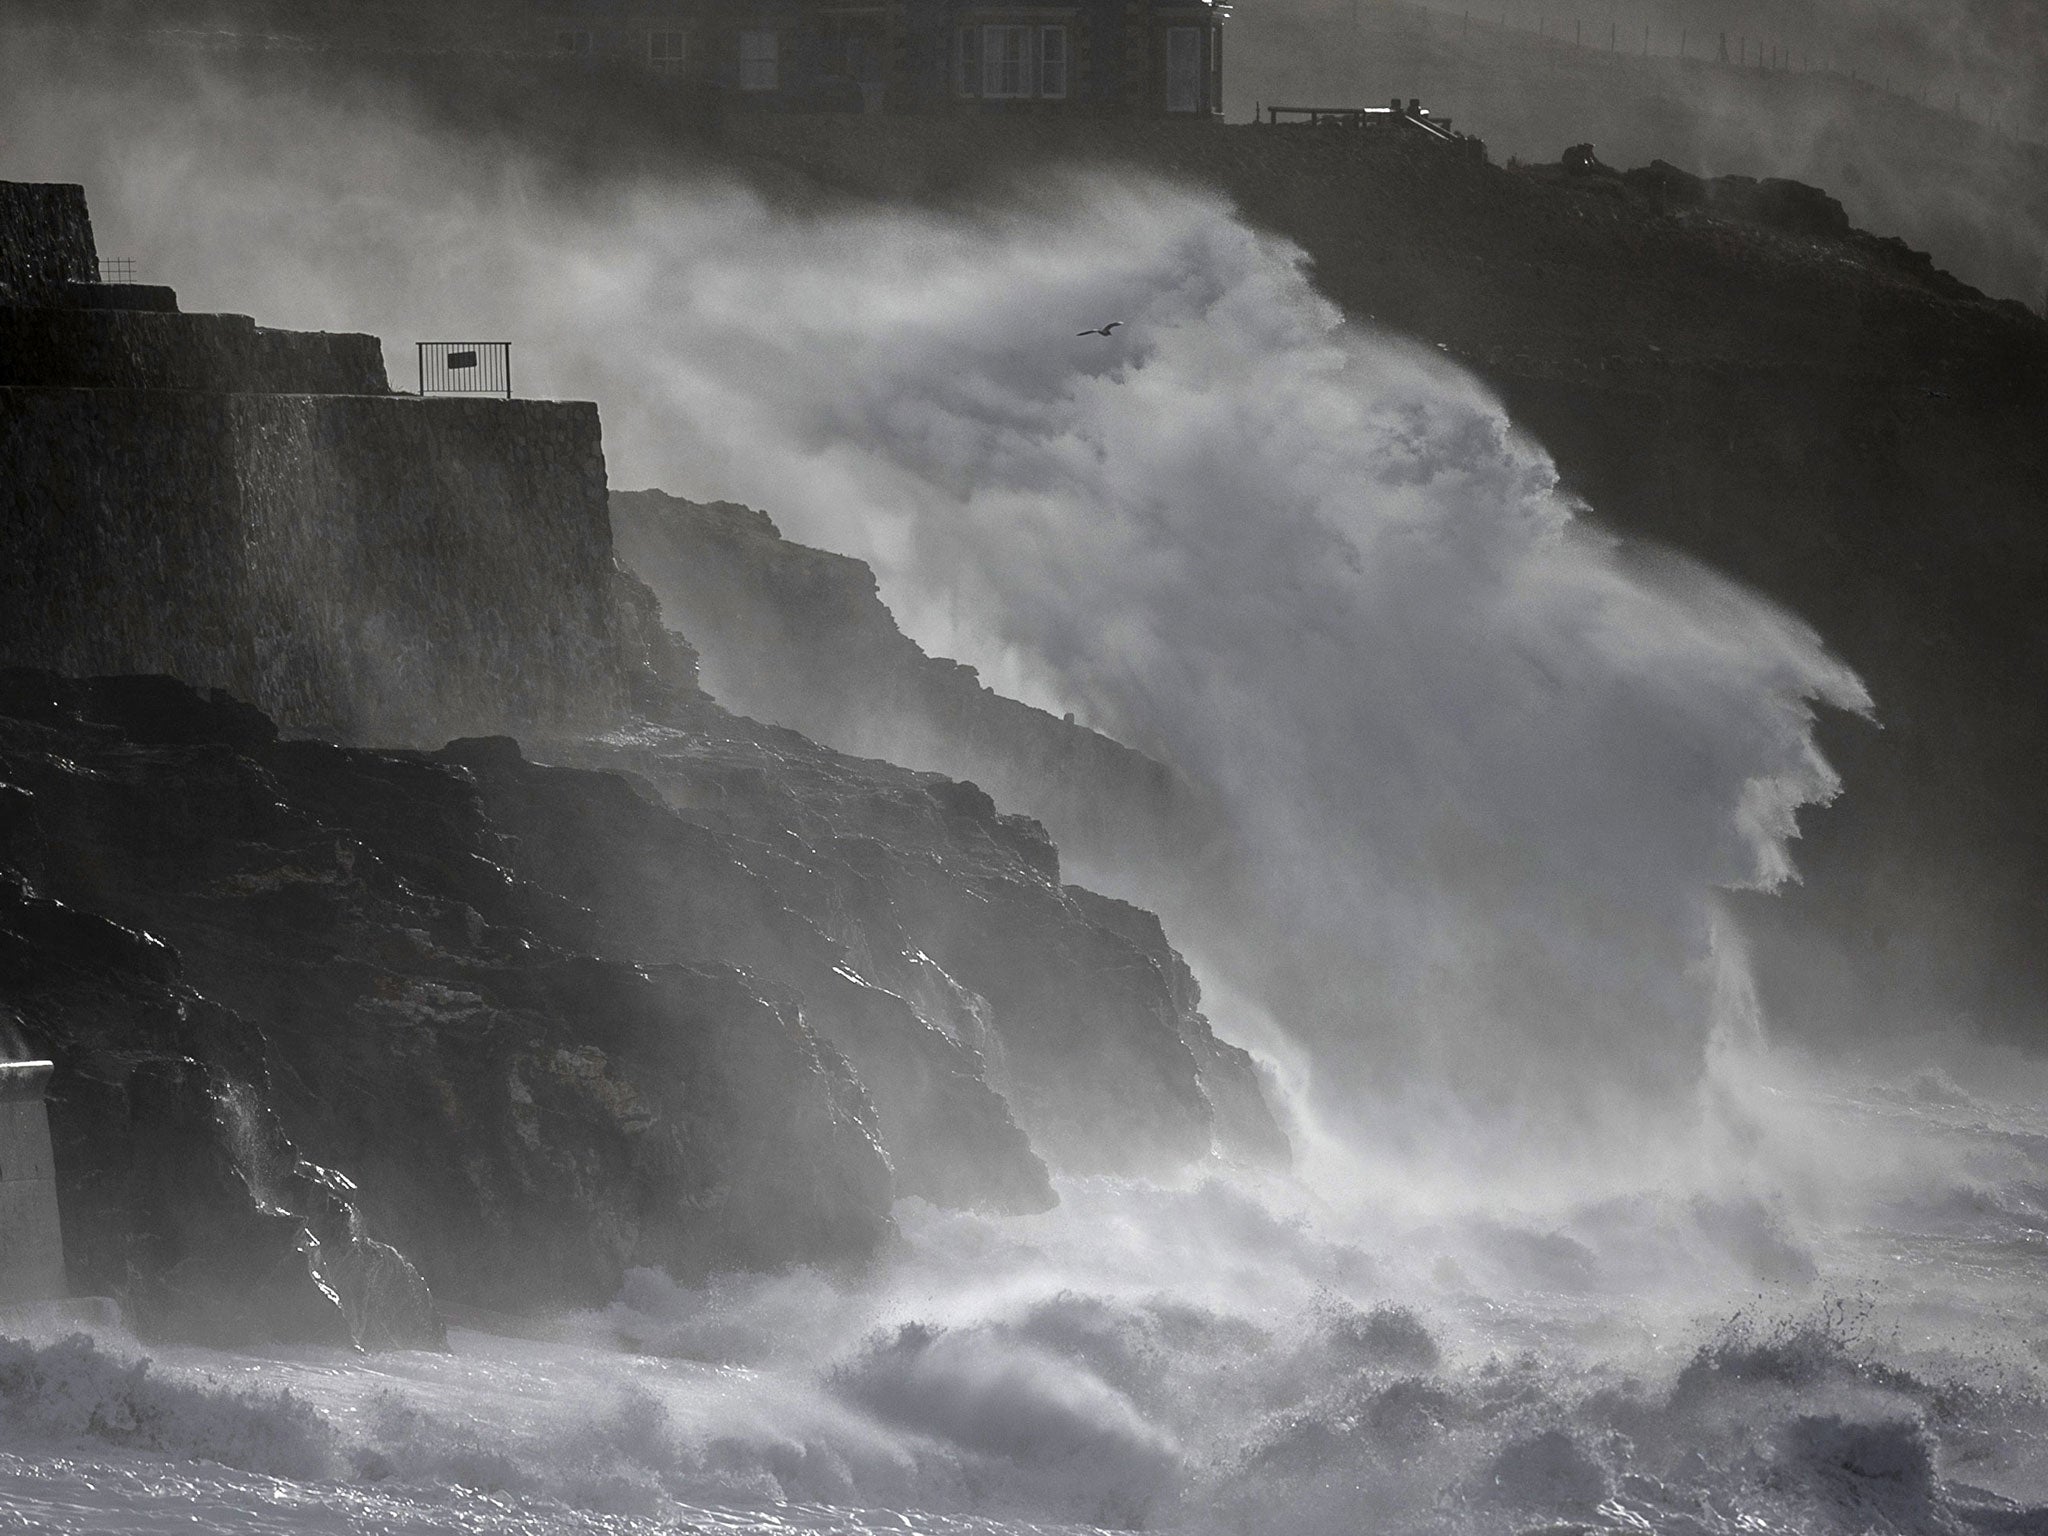 Storm waves break at the end of last week at Porthleven in Cornwall, England. The UK is bracing itself for more storms